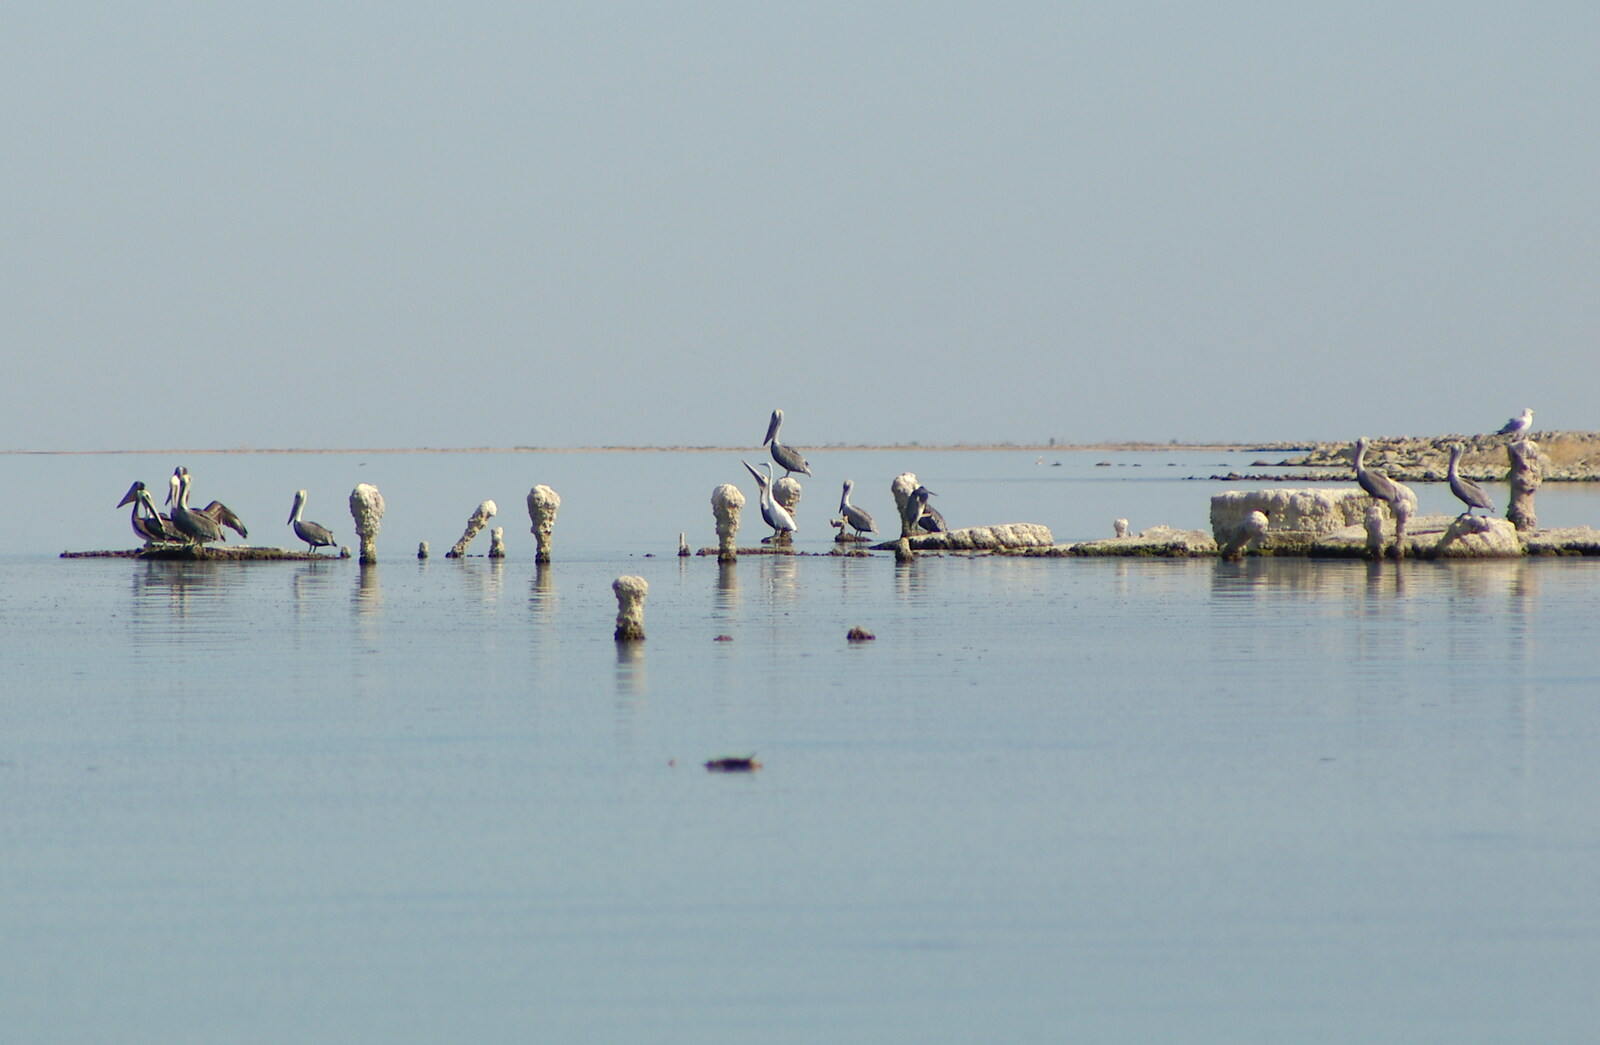 pelicans wait on stumps for passing fish from California Desert 2: The Salton Sea and Anza-Borrego to Julian, California, US - 24th September 2005